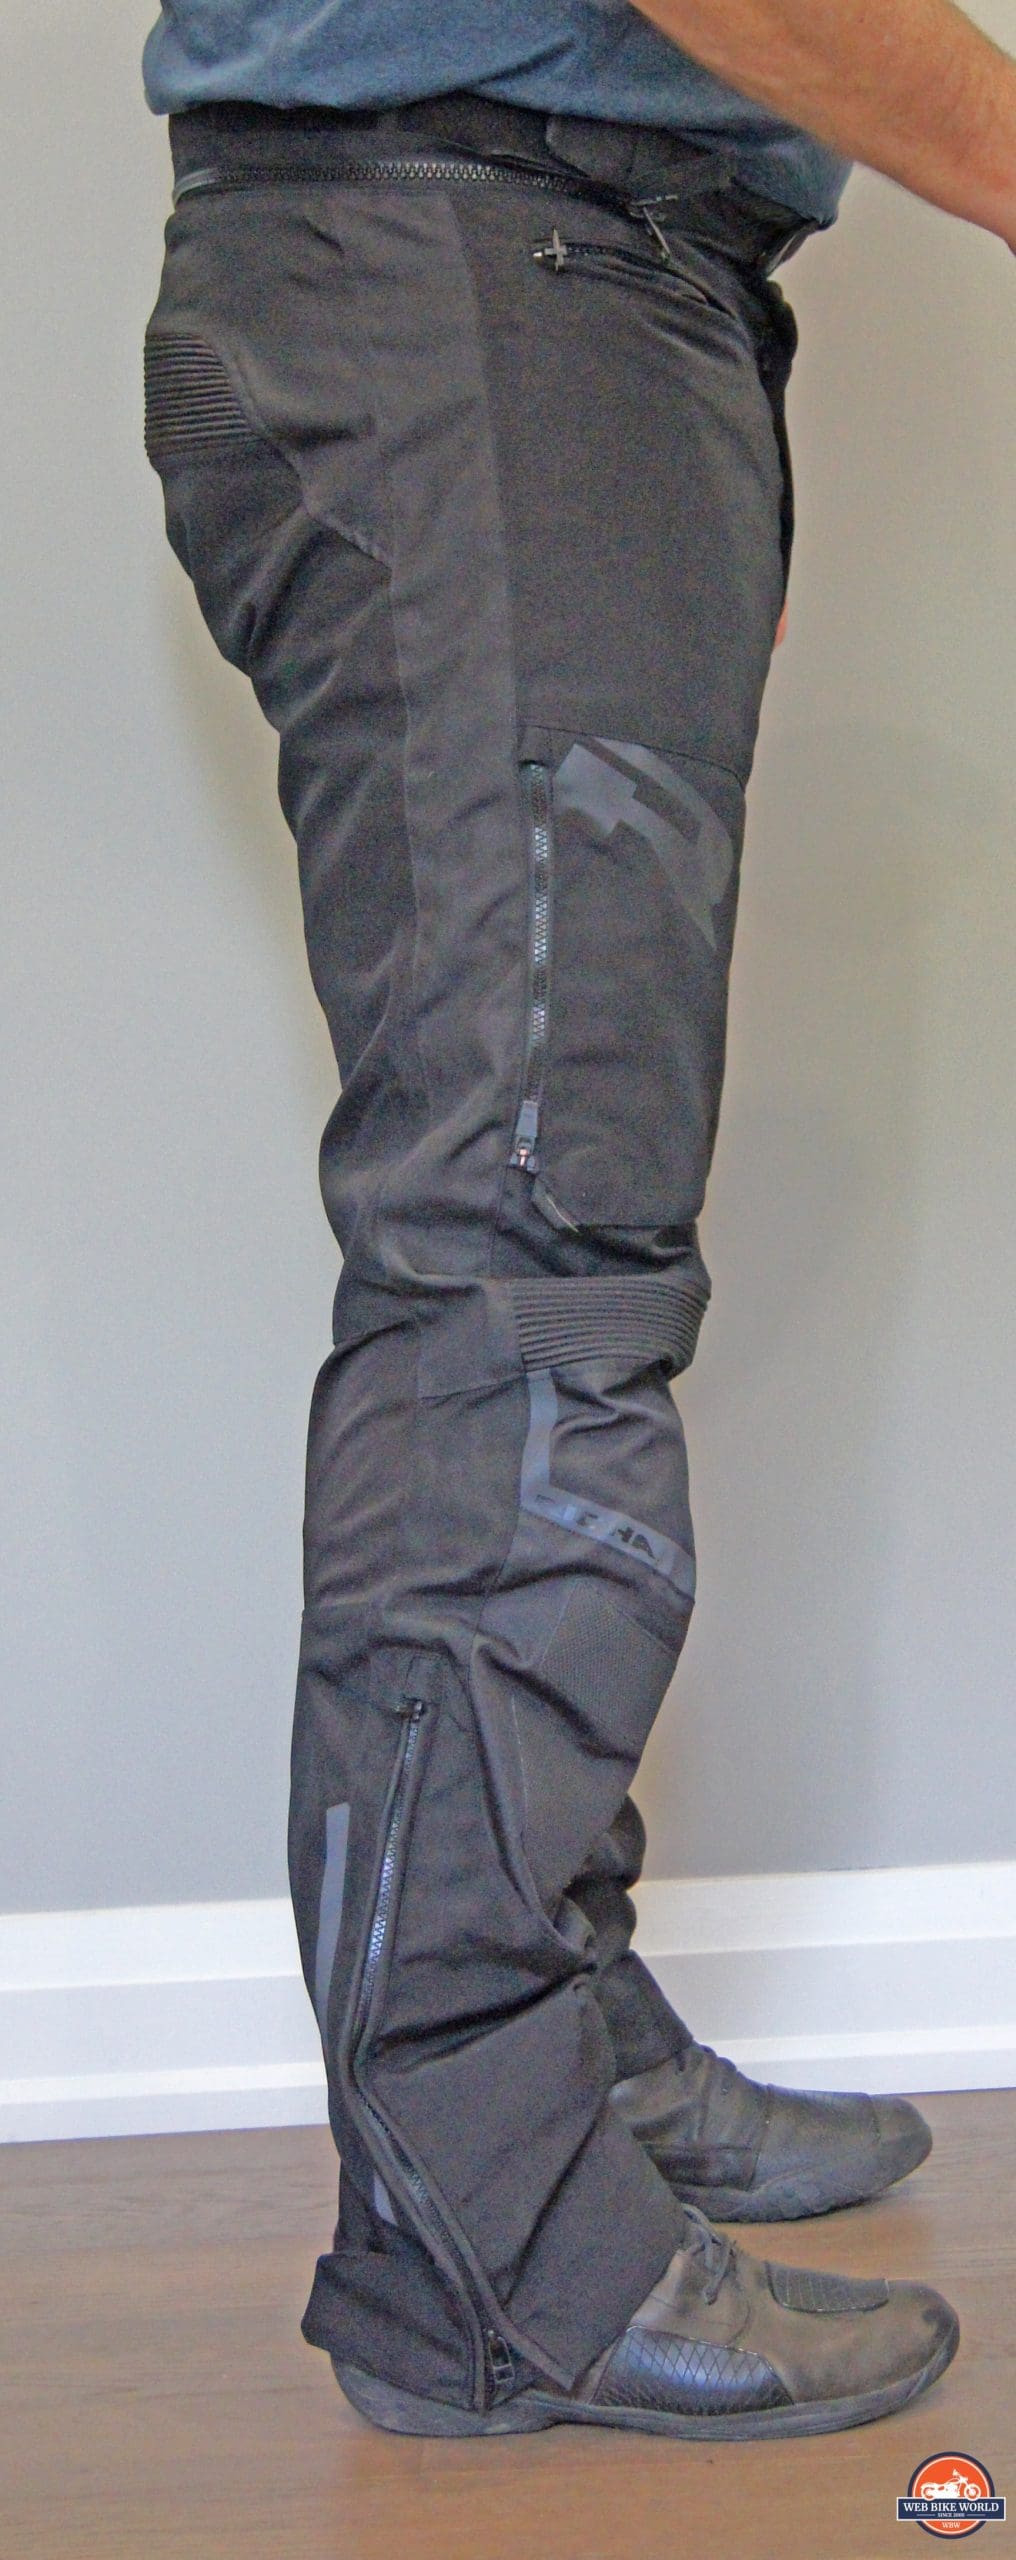 Side view of Richa Brutus GTX Pants with reflective elements visible